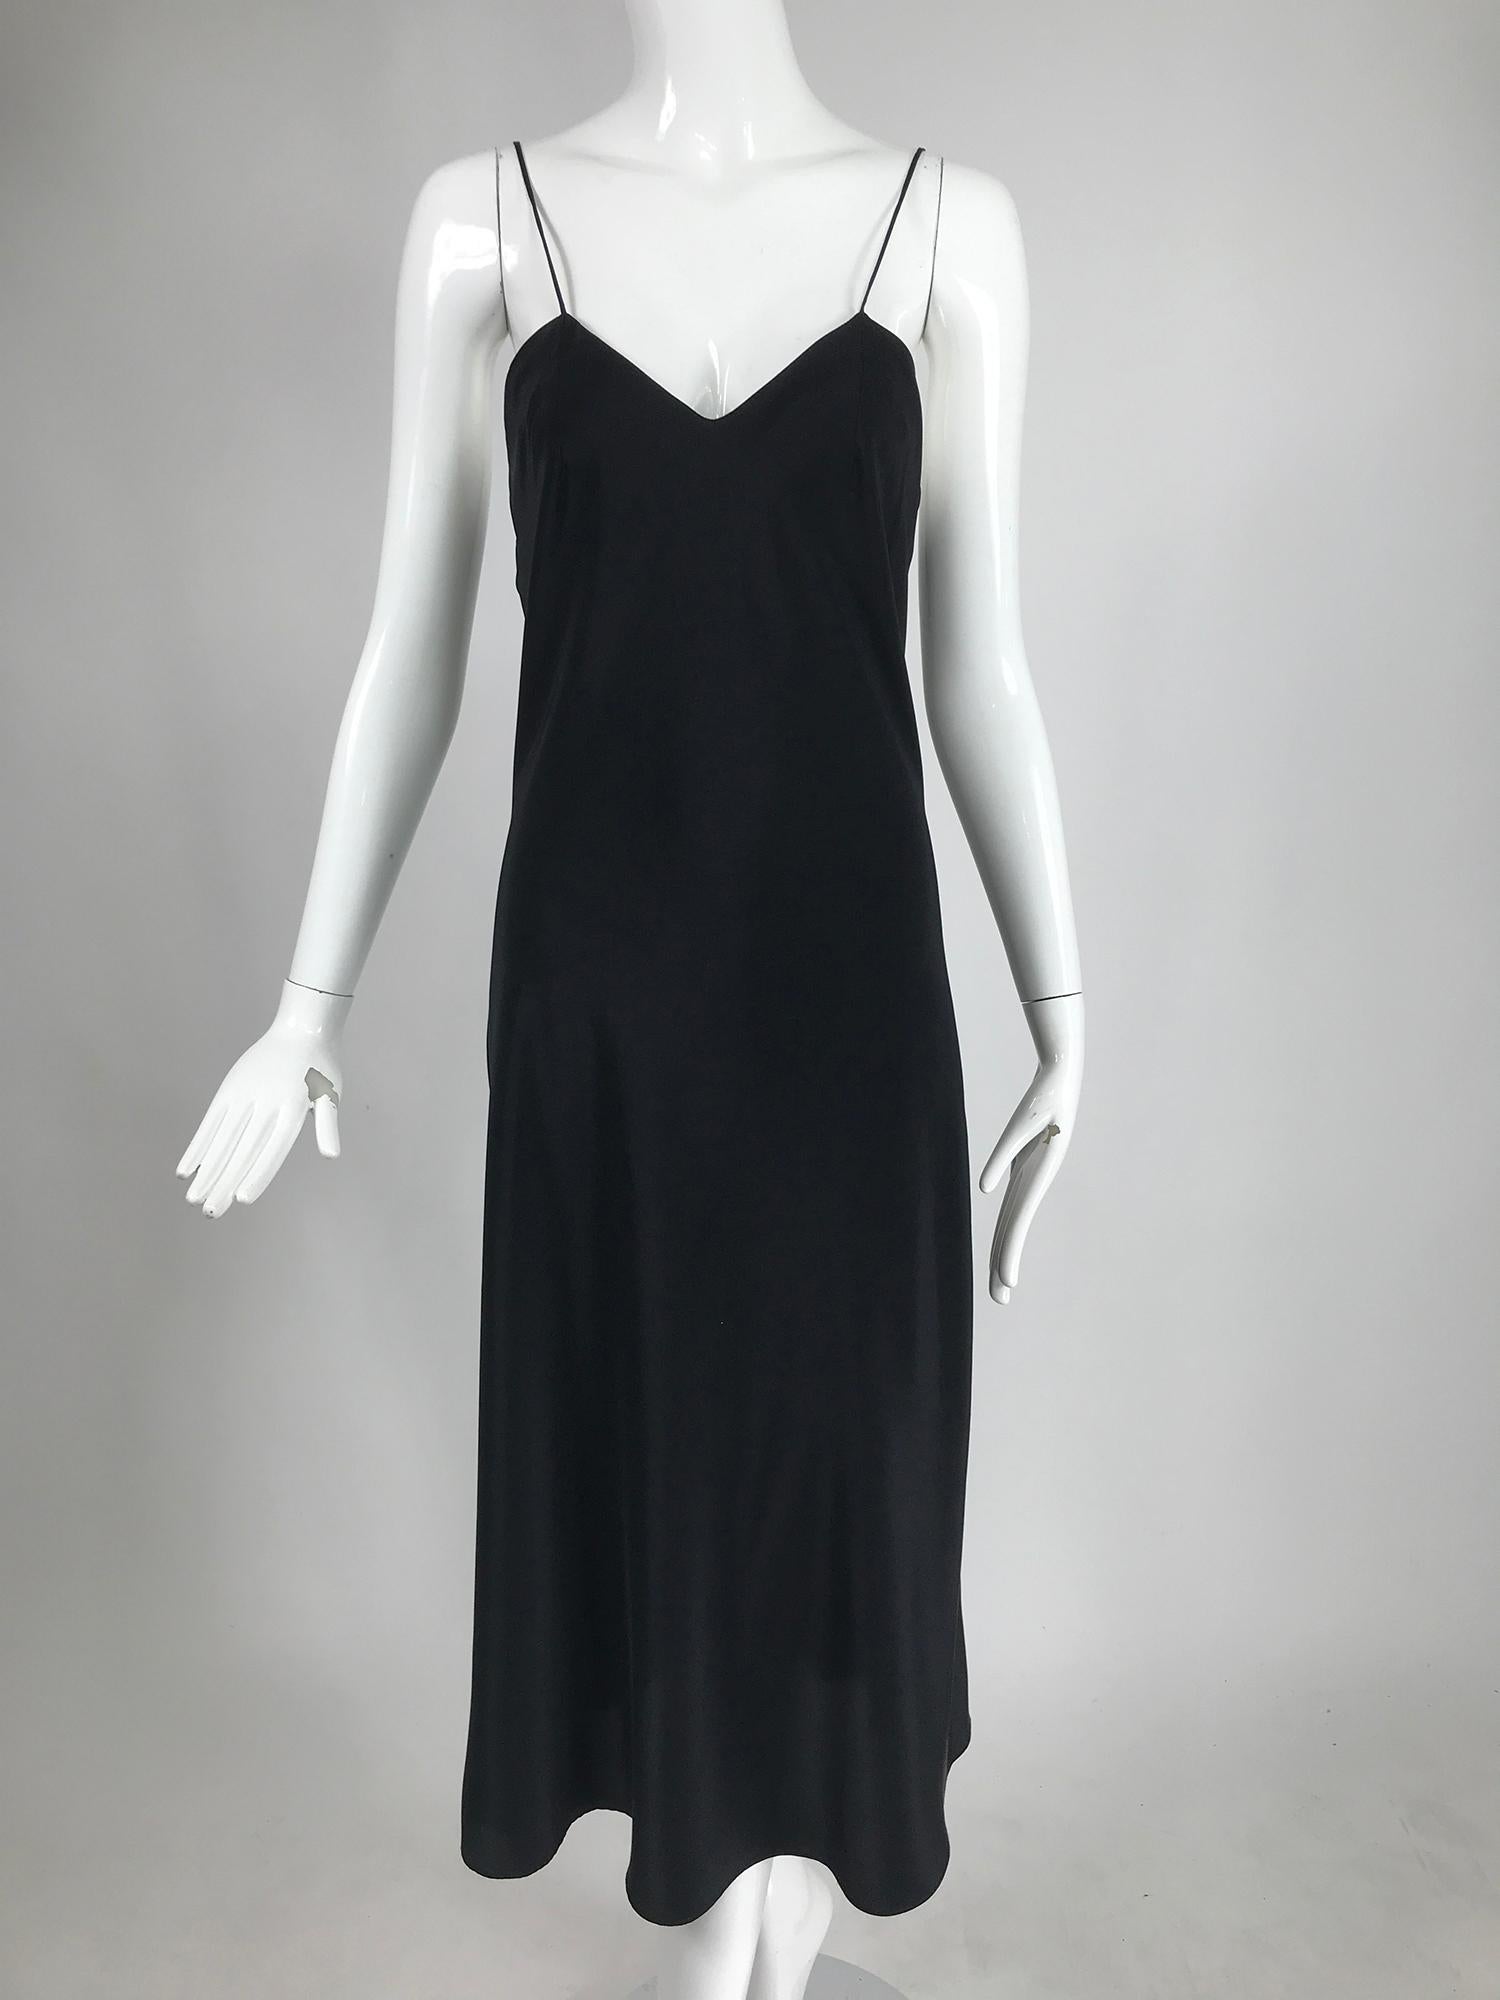 Adolfo black silk slip dress and chiffon cape from the 1970s. Amazing two piece set, the black slip dress is silk satin, bias cut with thin spaghetti straps. The dress is unlined with facings at the neckline. The matching cape is sheer silk chiffon,